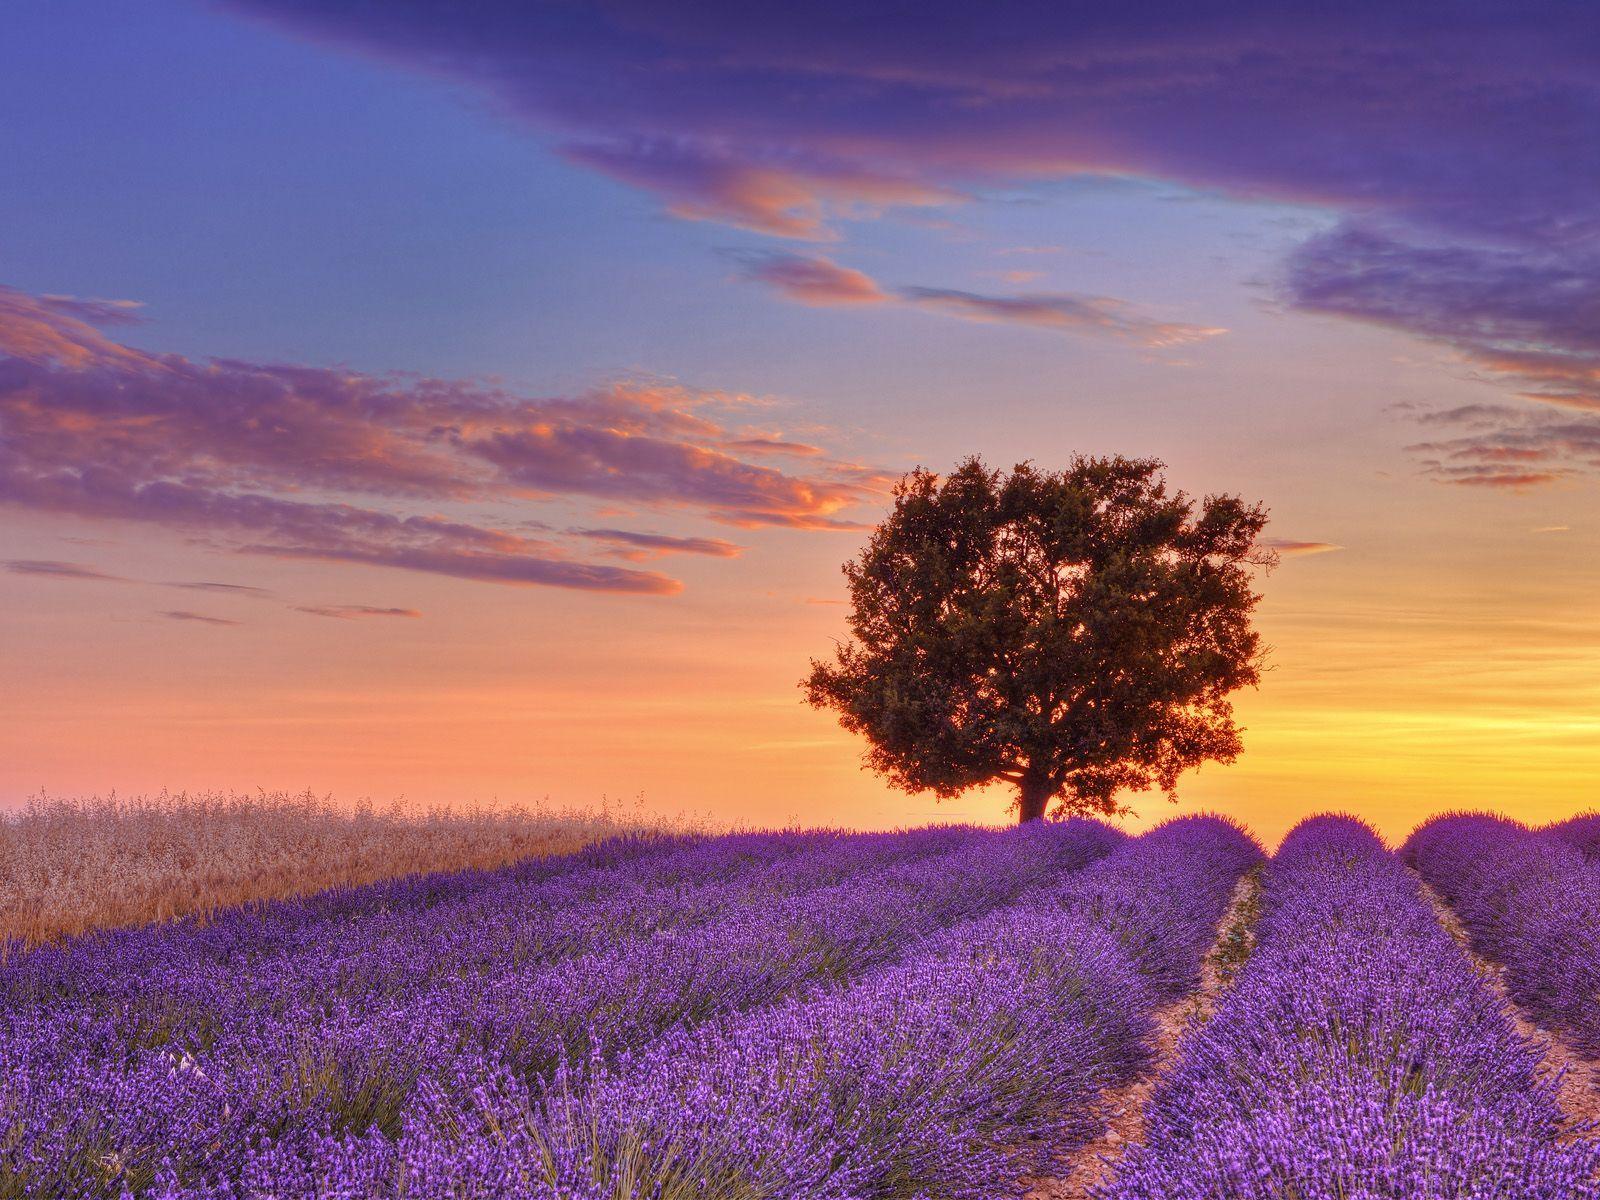 English Lavender Field and Lone Tree, Provence, France. Growing